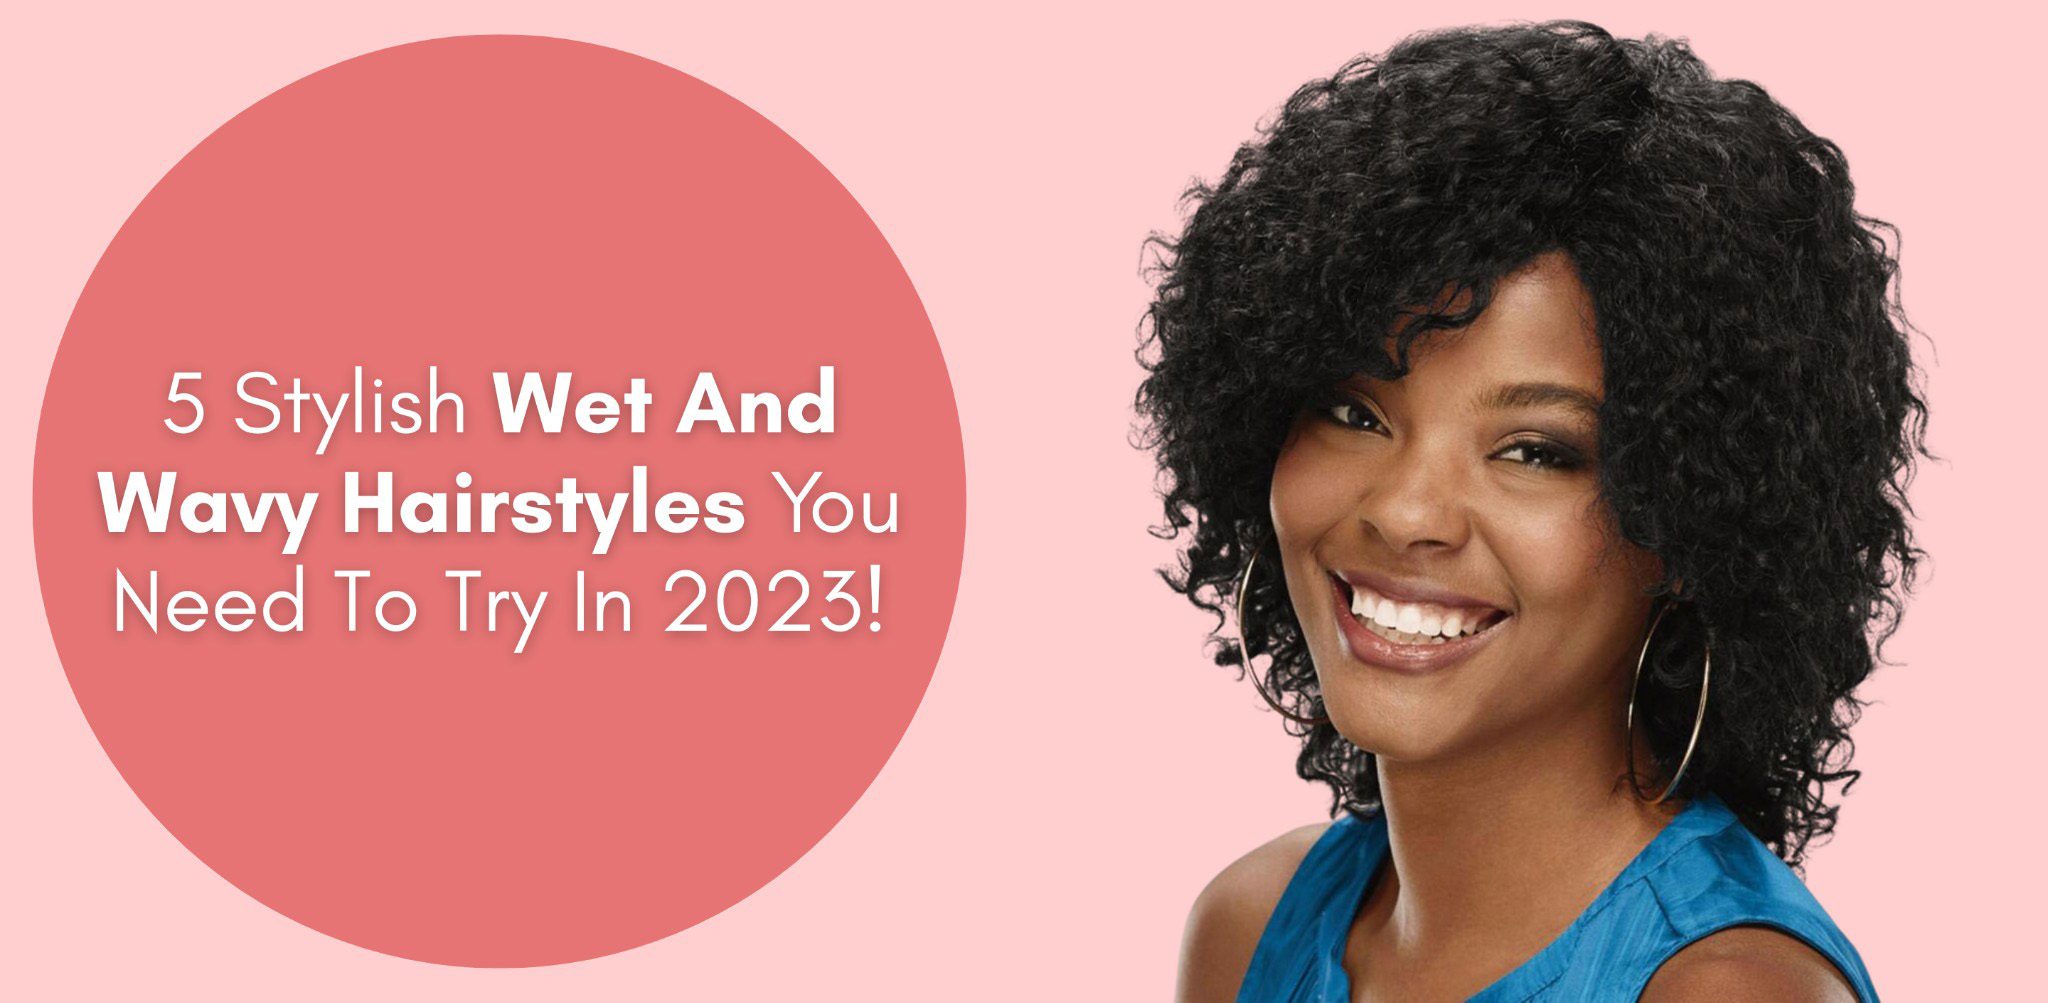 5 stylish wet and wavy hairstyles you need to try in 2023